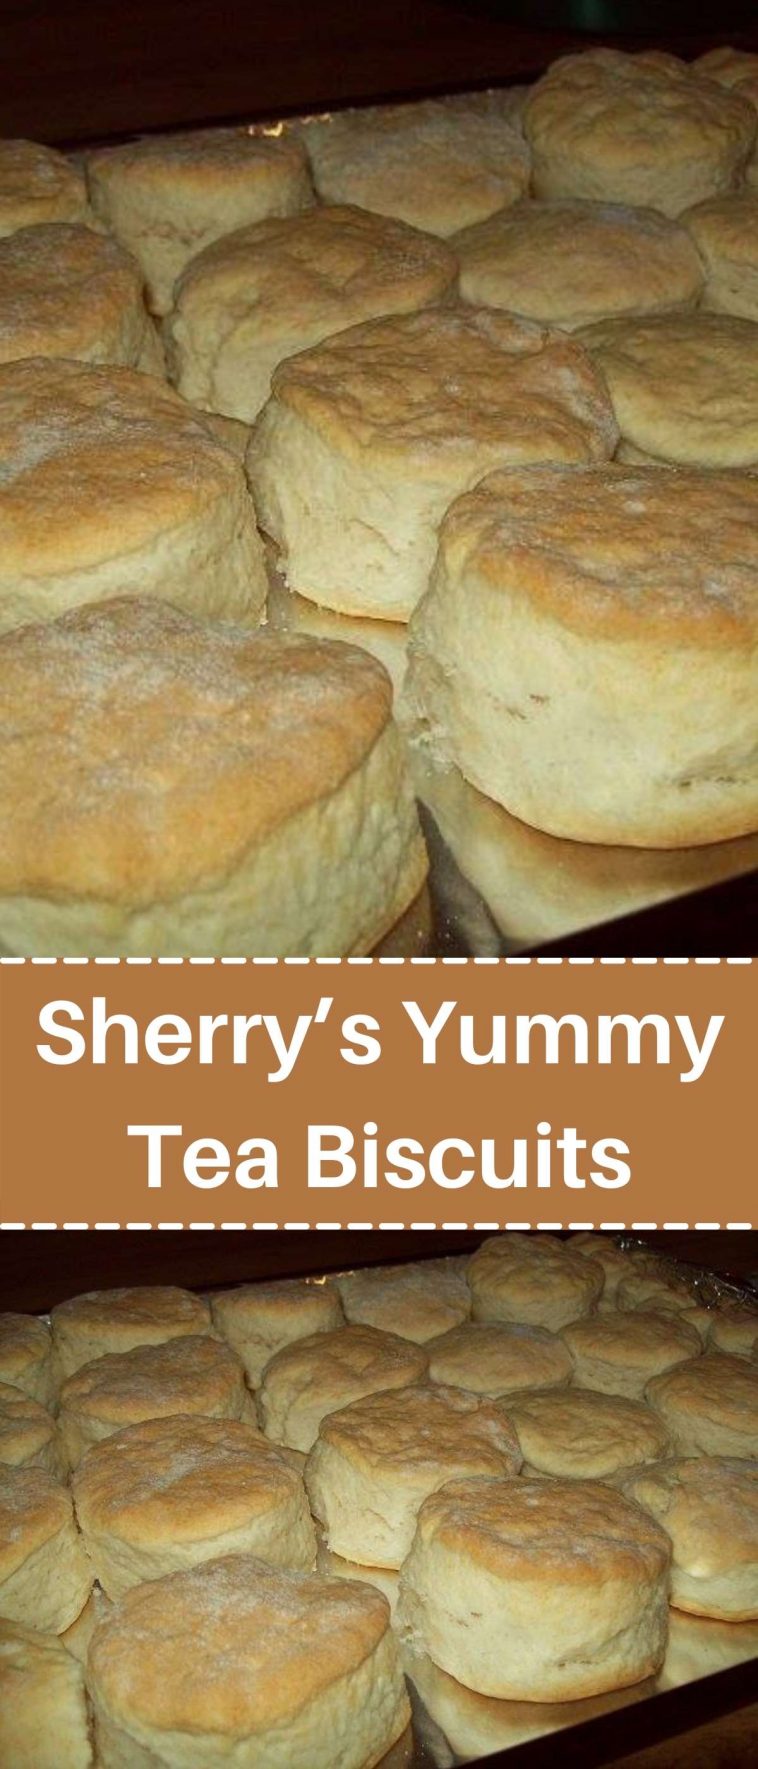 Sherry’s Yummy Tea Biscuits